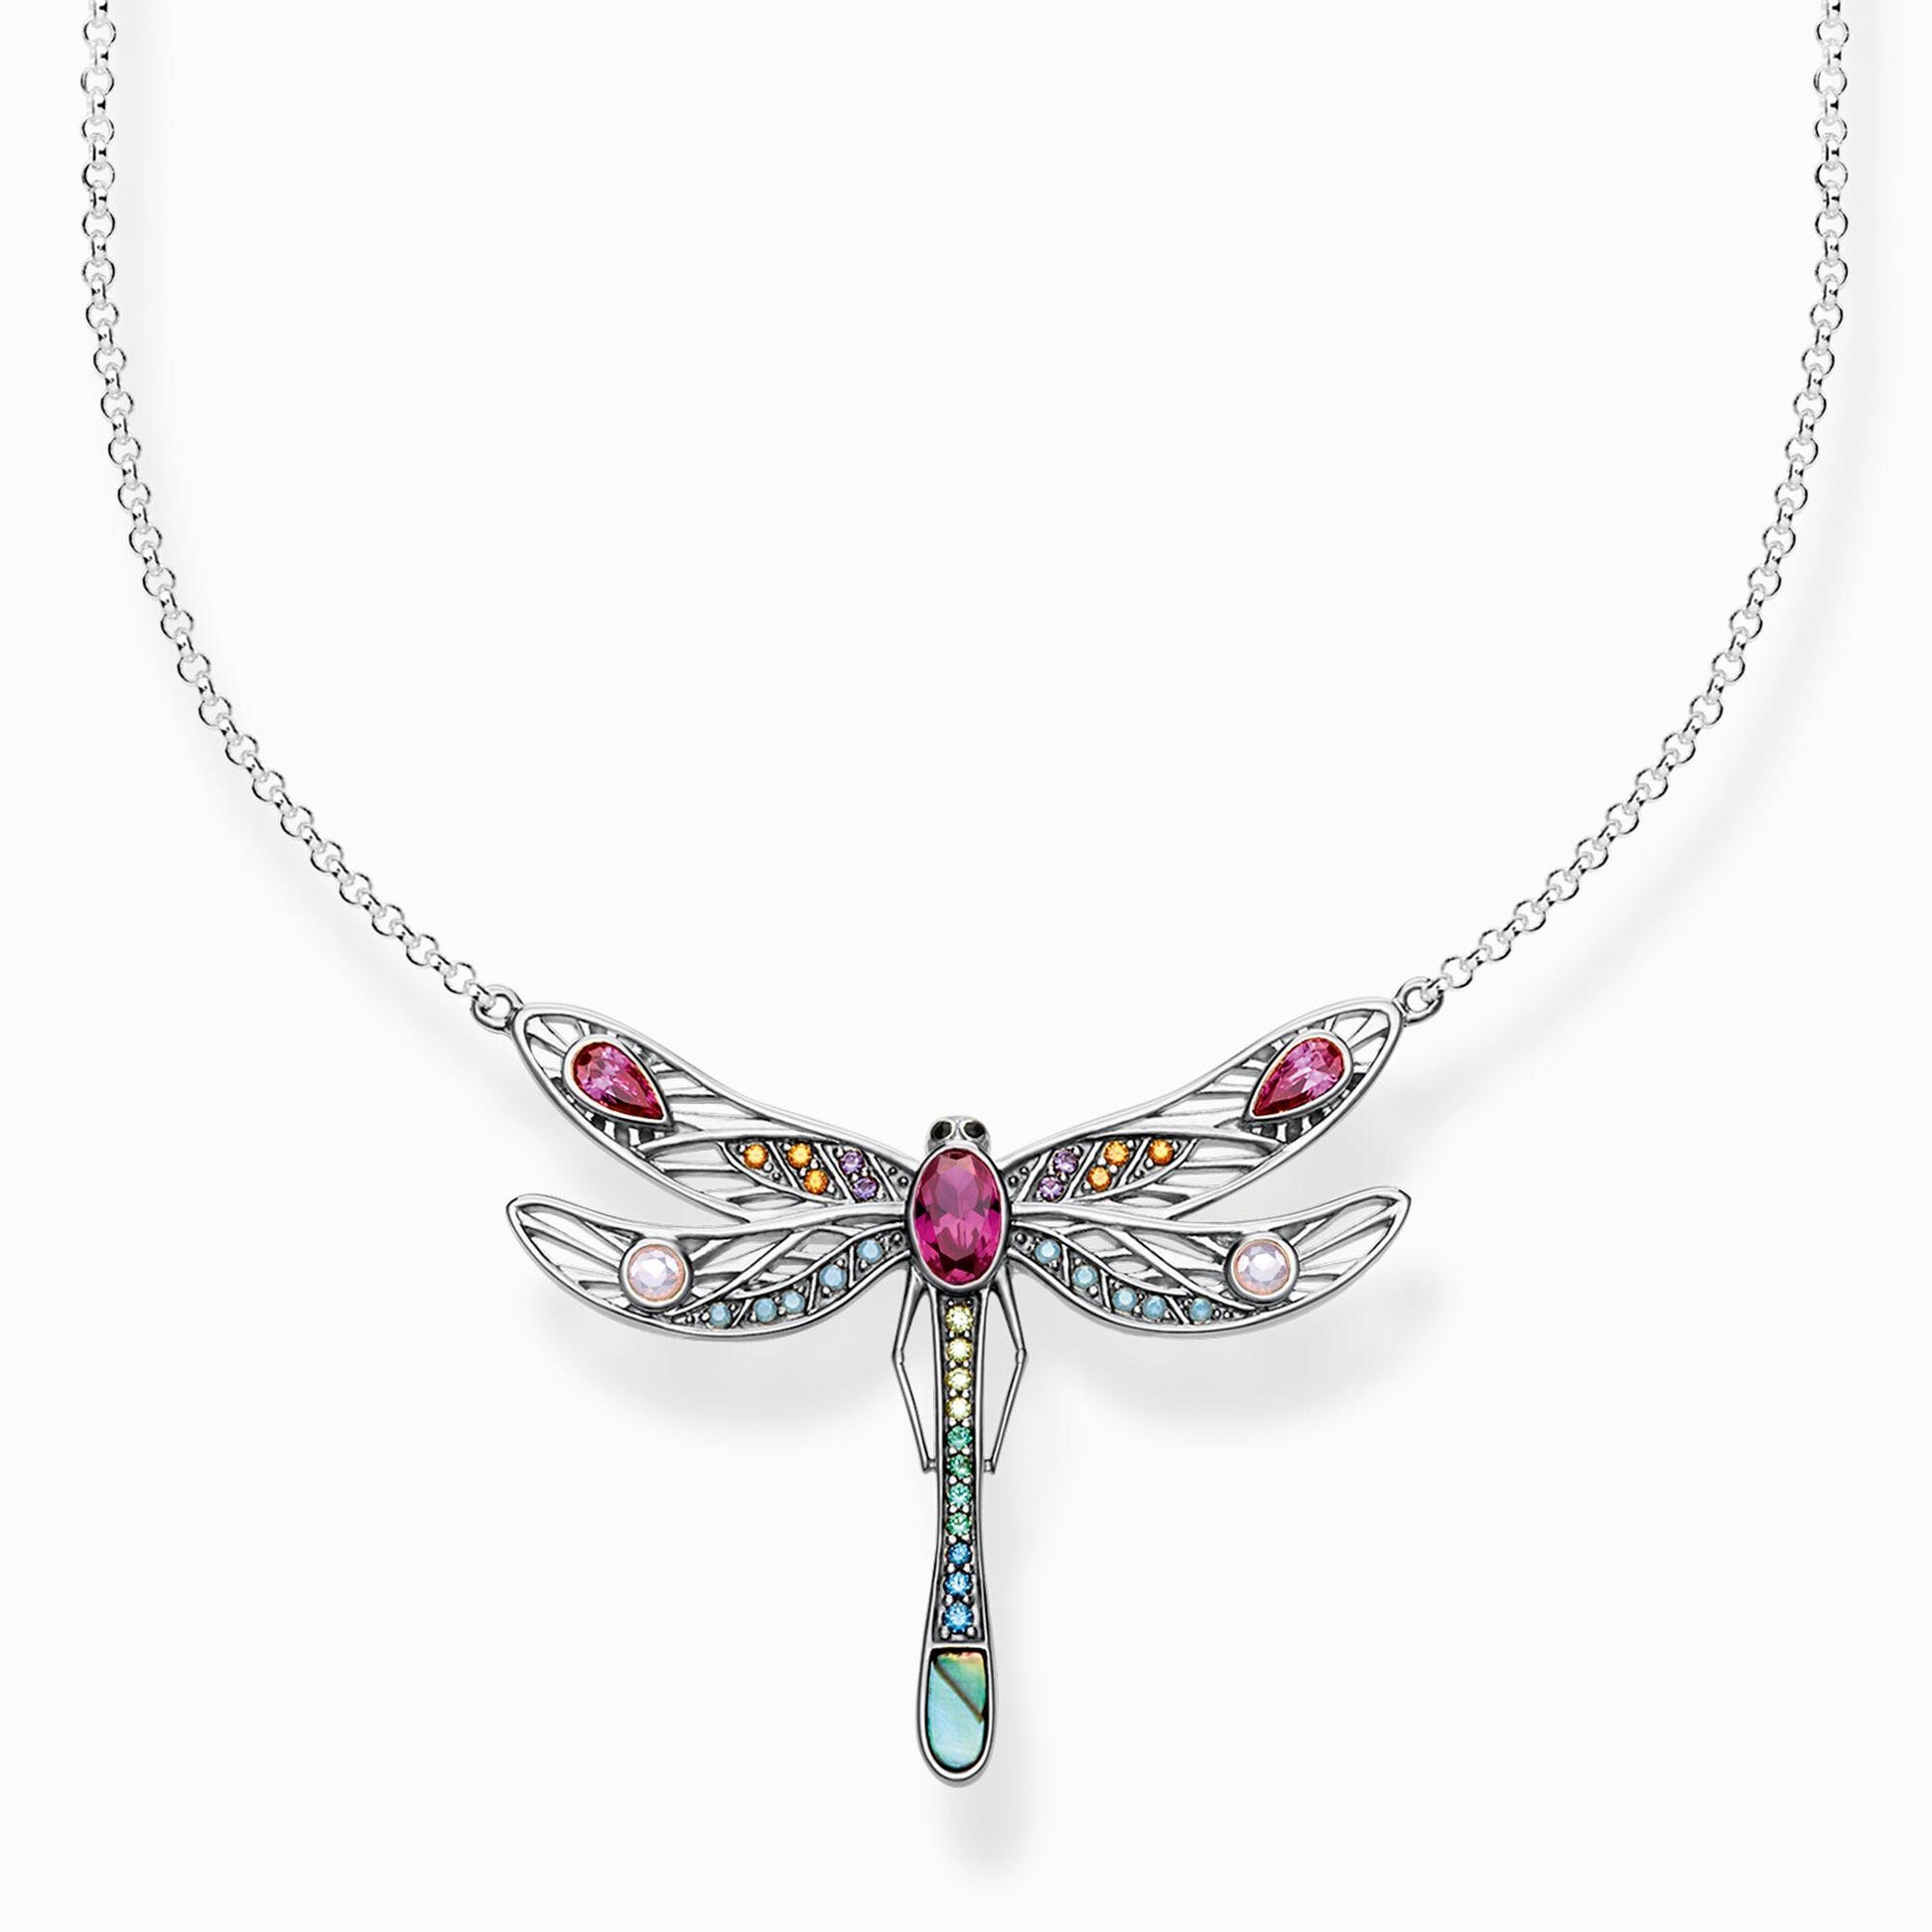 Thomas Sabo Sterling Silver Multicoloured Dragonfly Necklace KE1838 - Judith Hart Jewellers